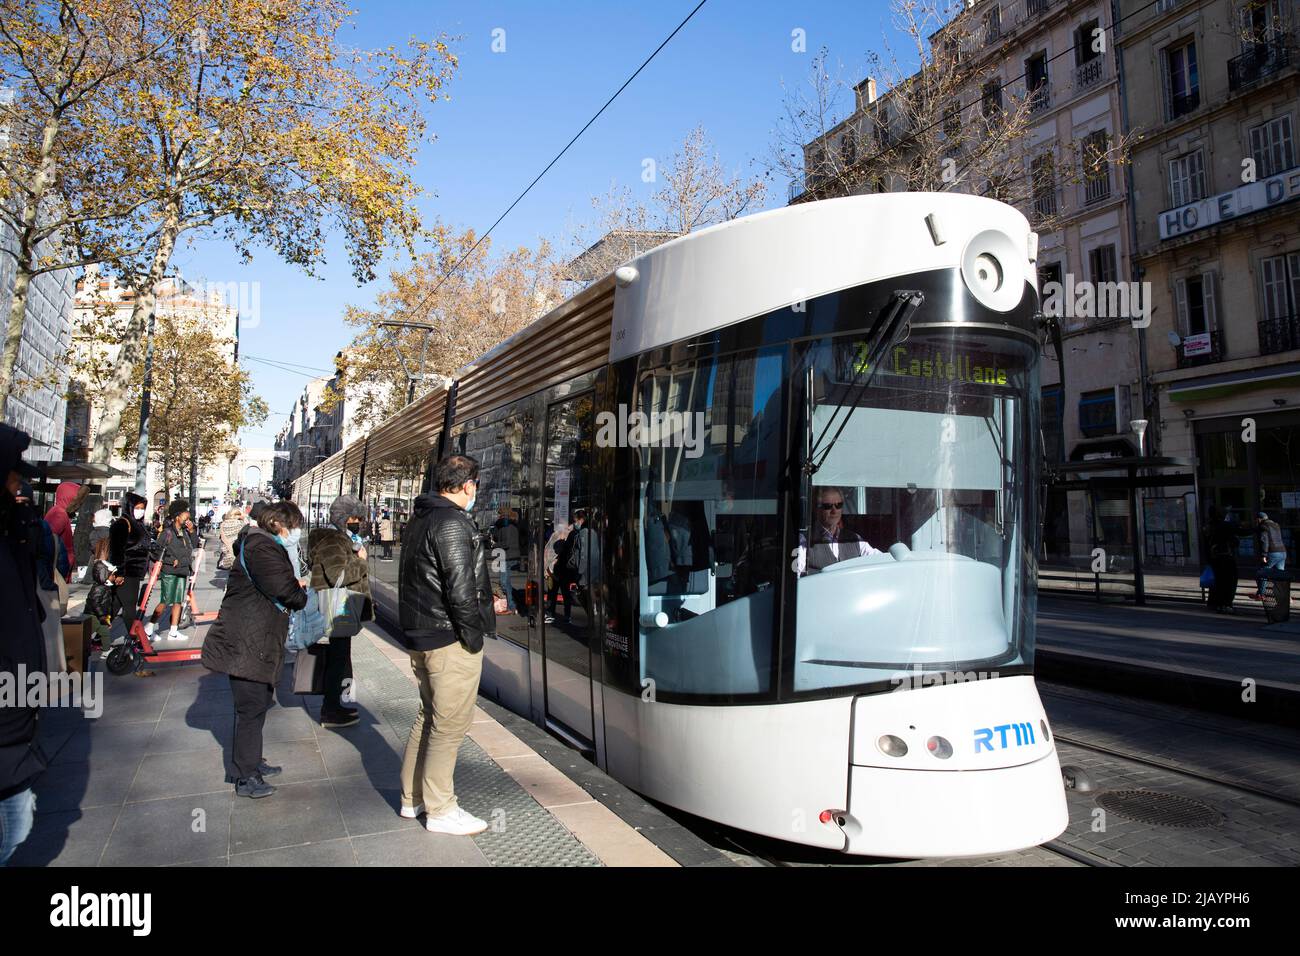 Tram network in Marseille, France on December 6, 2021. The city's modern tram network consists of three lines, serving 32 stations and operating over 15.8 kilometres (9.8 miles) of route. It opened on July 2007. Photograph by Bénédicte Desrus Stock Photo